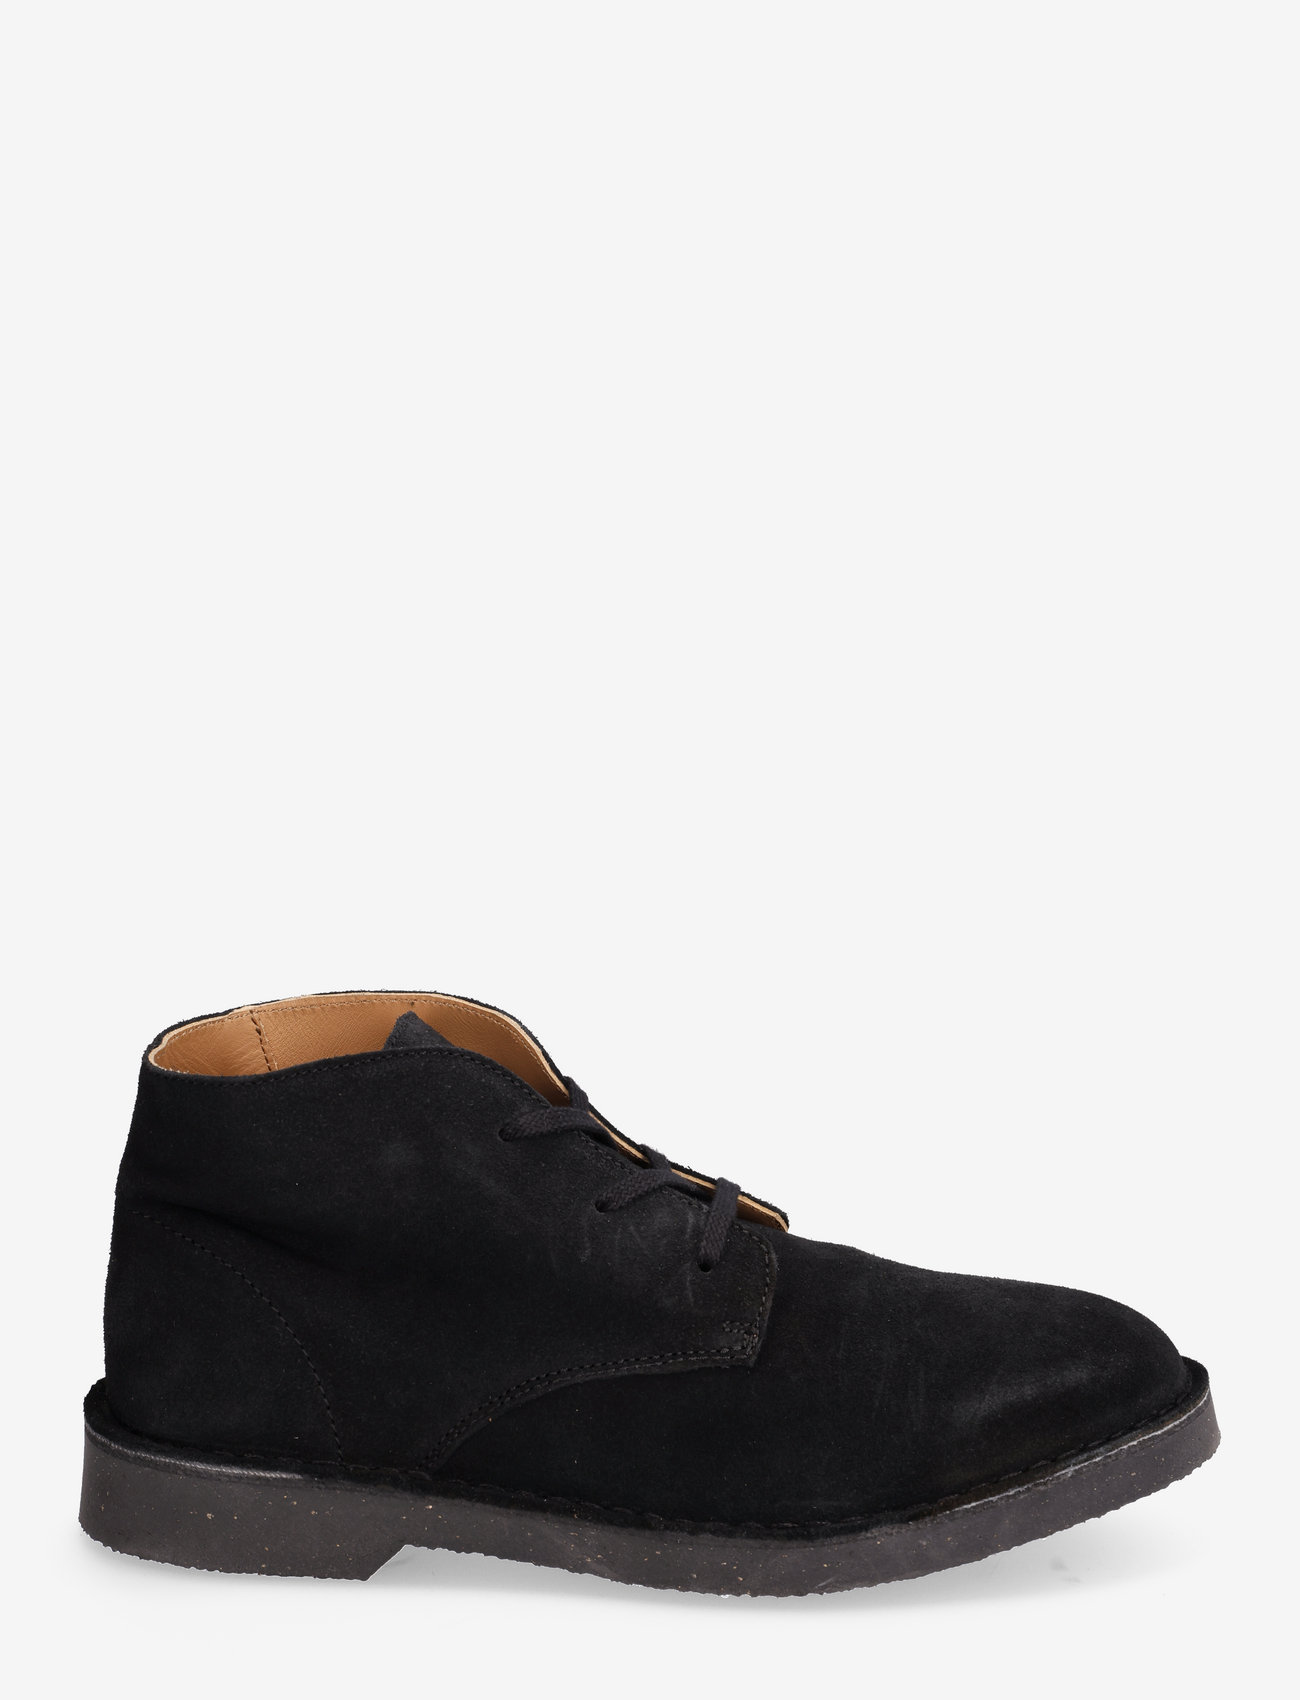 Selected Homme - SLHRIGA NEW SUEDE CHUKKA BOOT B - aavikkokengät - black - 1